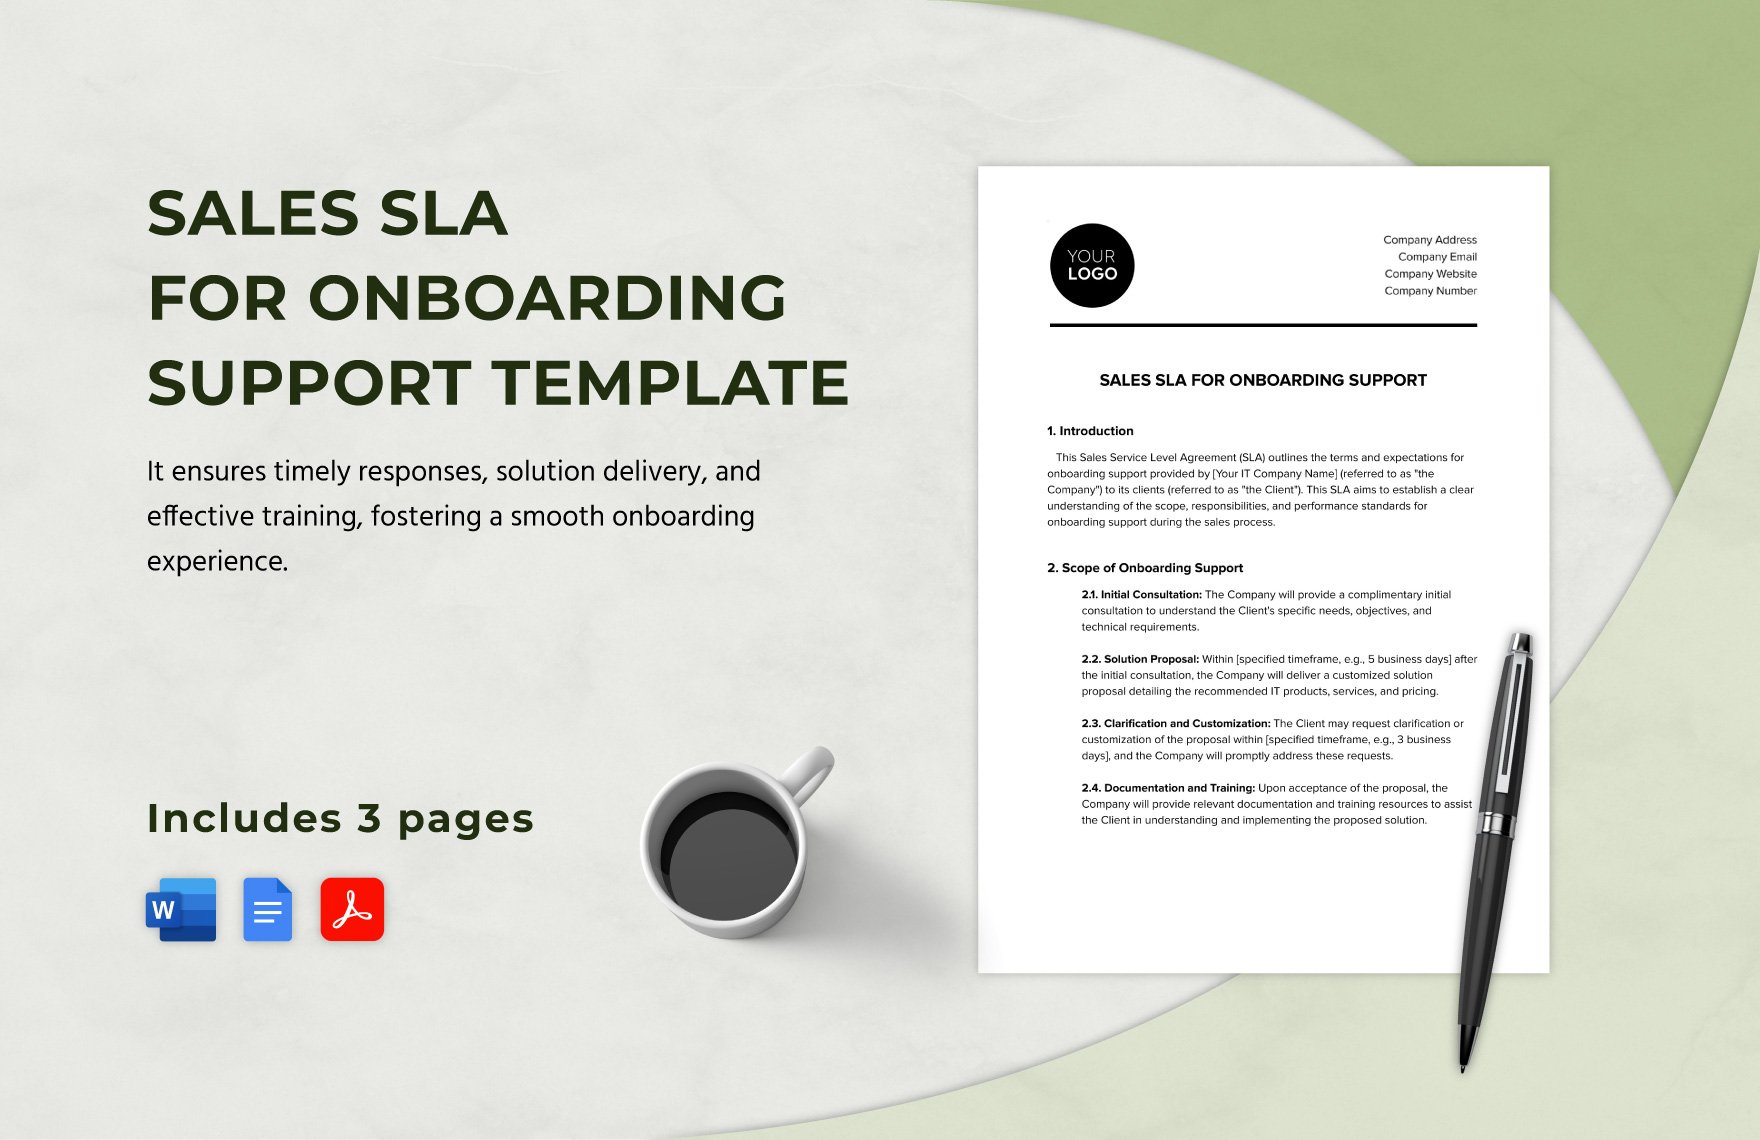 Sales SLA for Onboarding Support Template